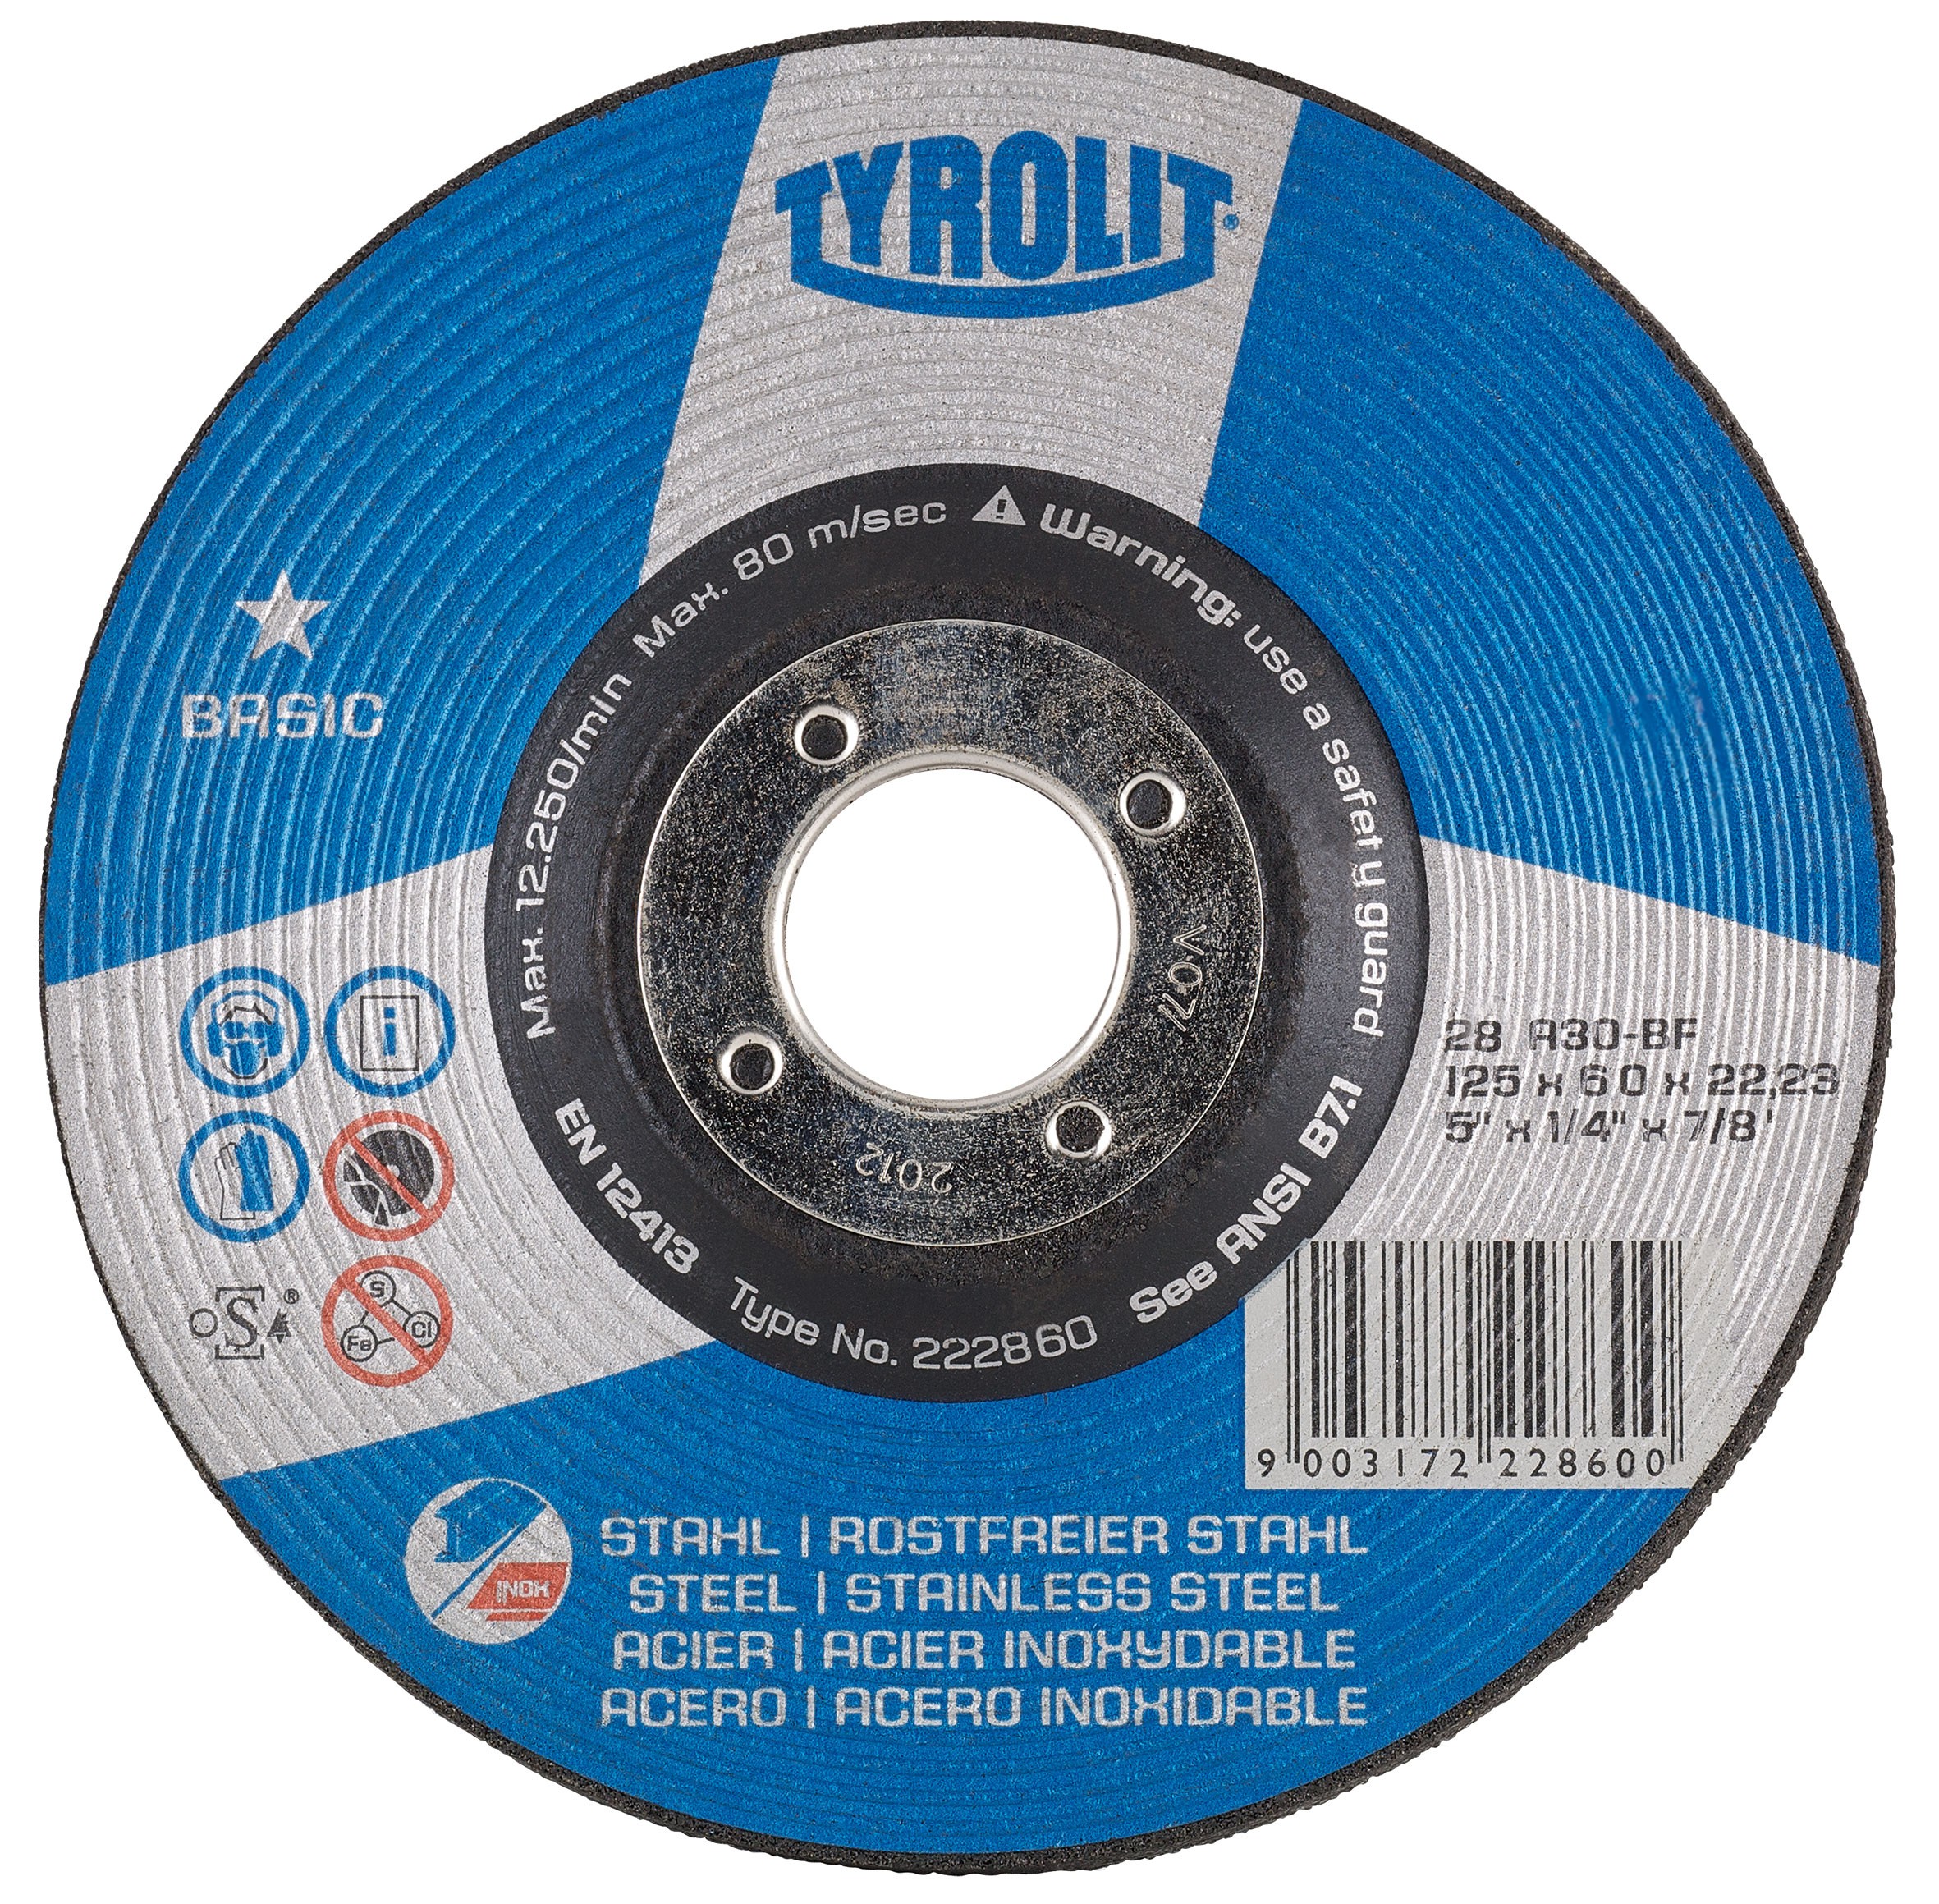 Details about   Tyrolit Grinding Wheel 2A60 M4 New Free Shipping 